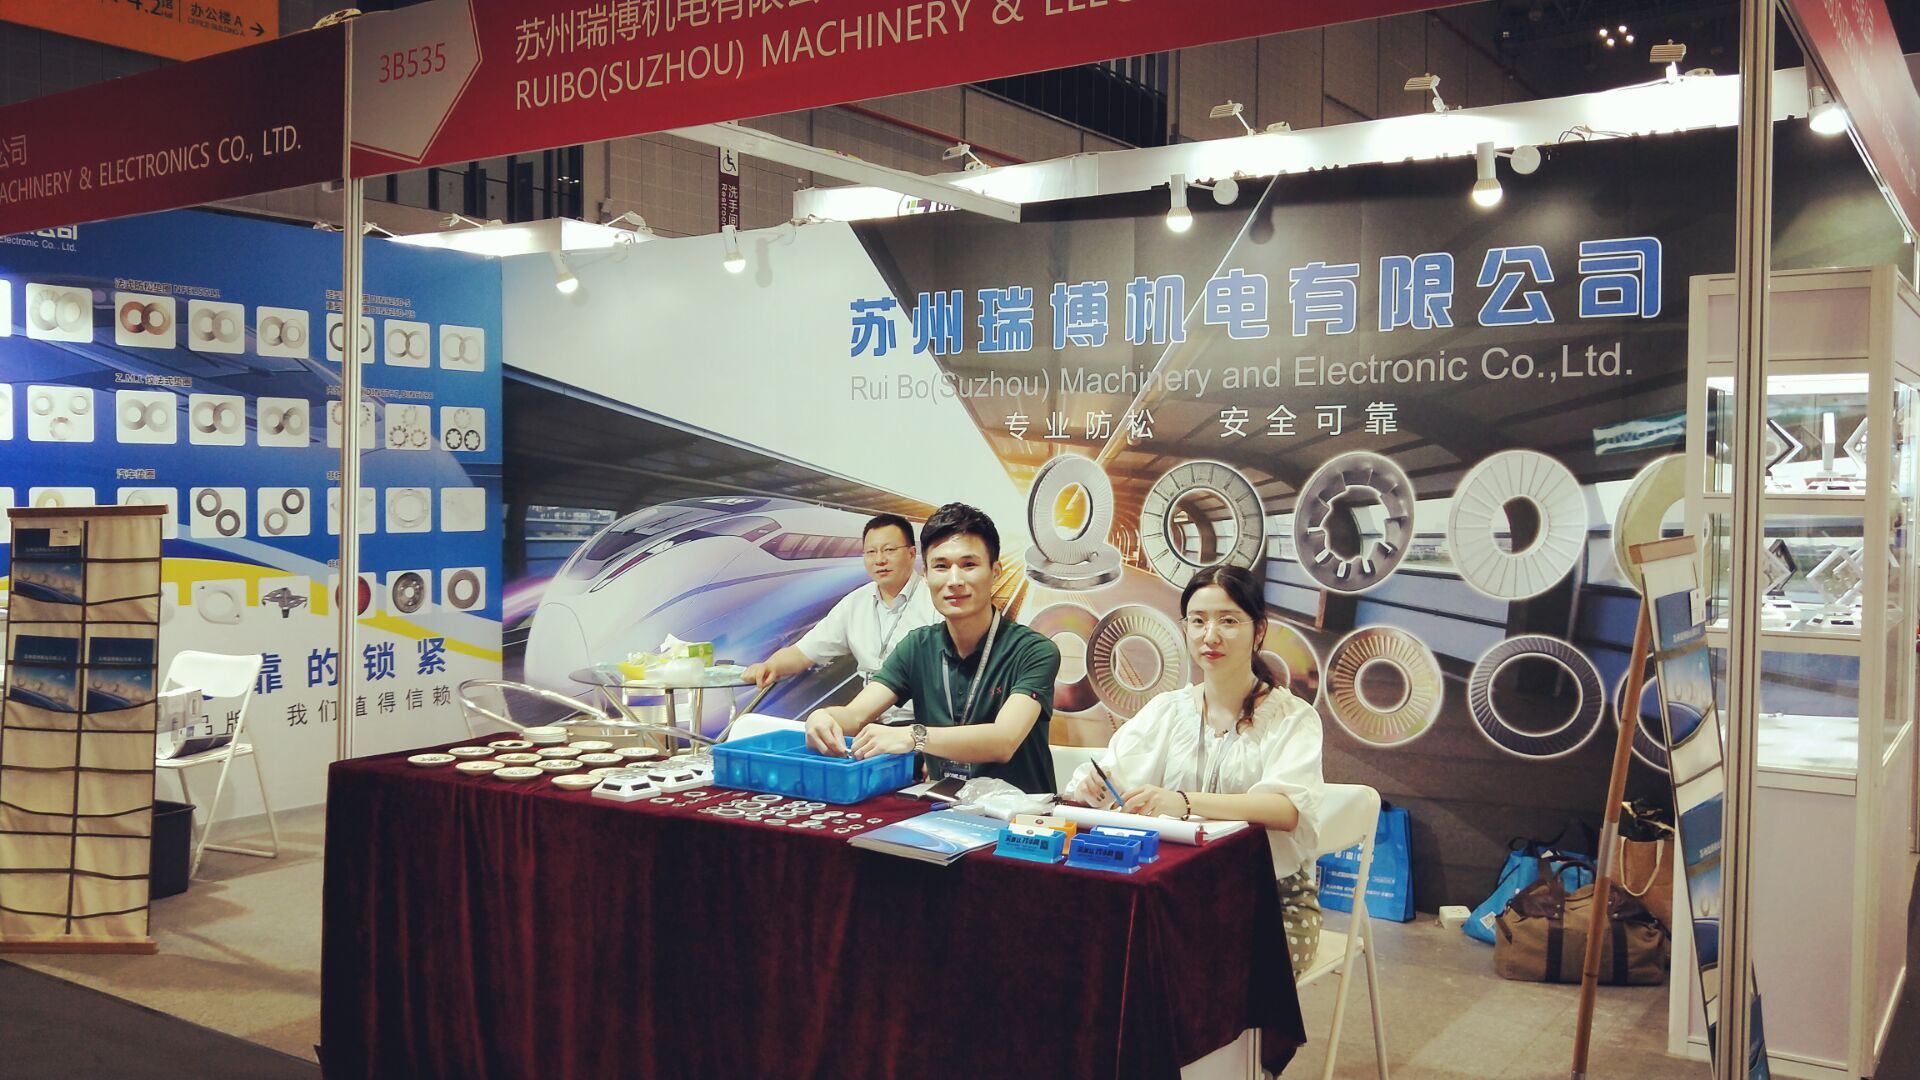 Shanghai Fastener Expo 2019 From June 26th to 28th,2019